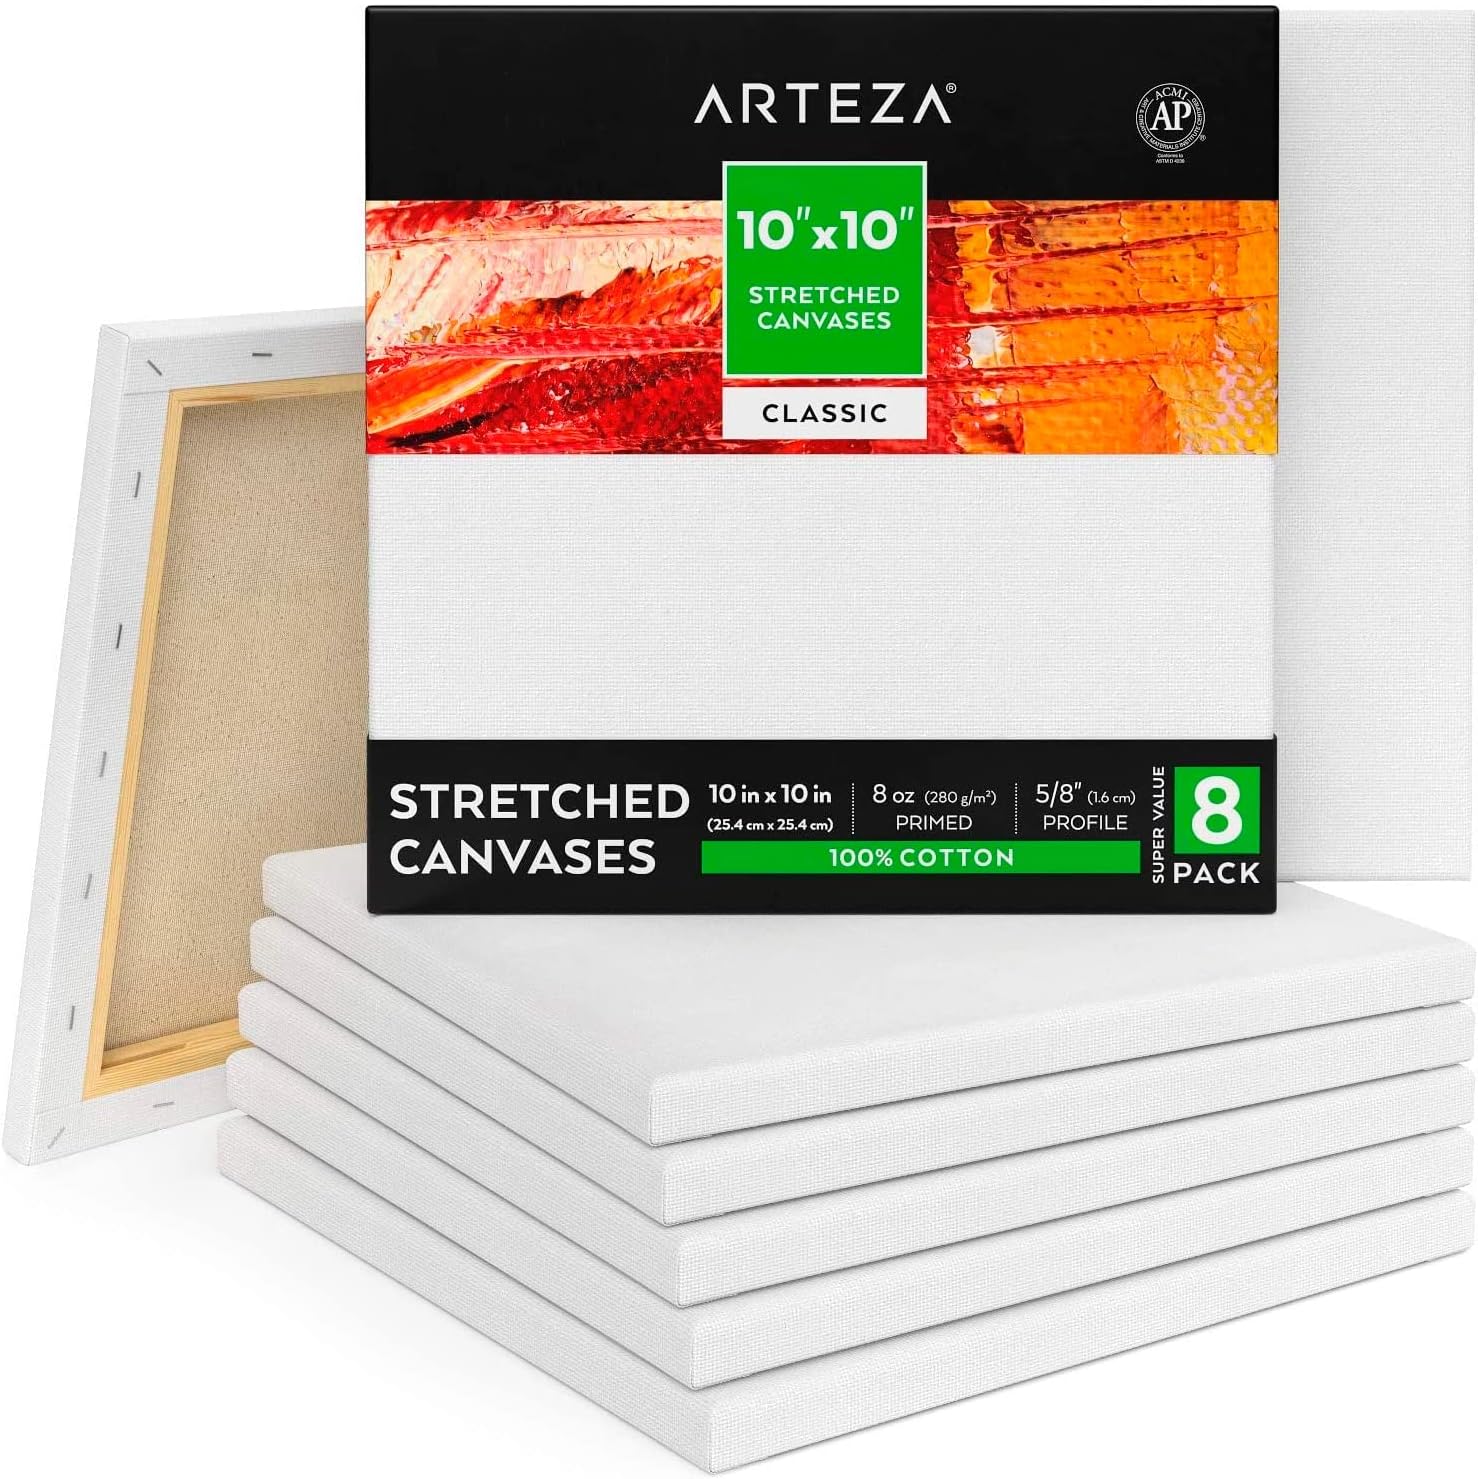  PHOENIX Stretched Canvas for Painting 8x8 Inch/7 Value Pack, 8  Oz Triple Primed 5/8 Inch Profile 100% Cotton White Blank Canvas, Square  Framed Canvas for Oil Acrylic & Pouring Art